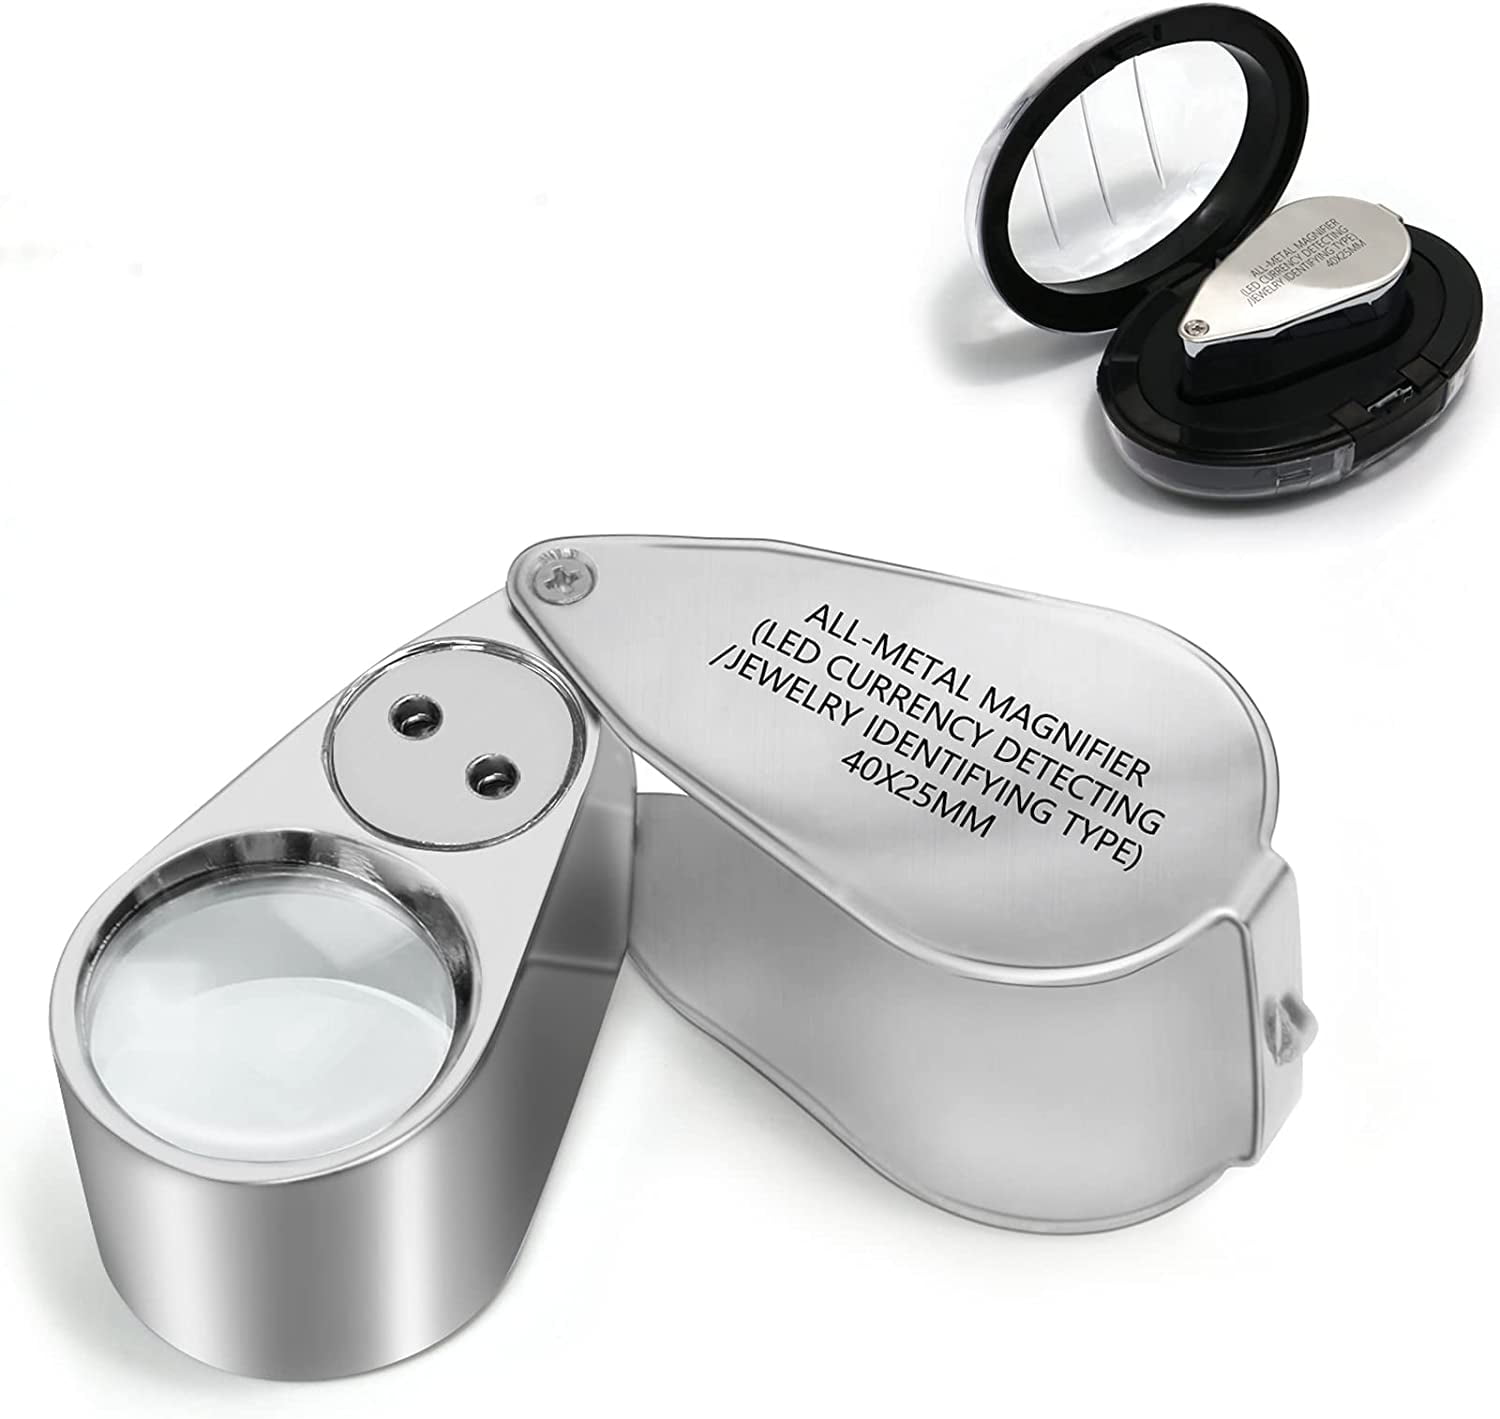 40X Full Metal Illuminated Jewelry Loop Magnifier, XYK Pocket Folding  Magnifying Glass Jewelers Eye Loupe with LED(LED Currency Detecting/Jewelry